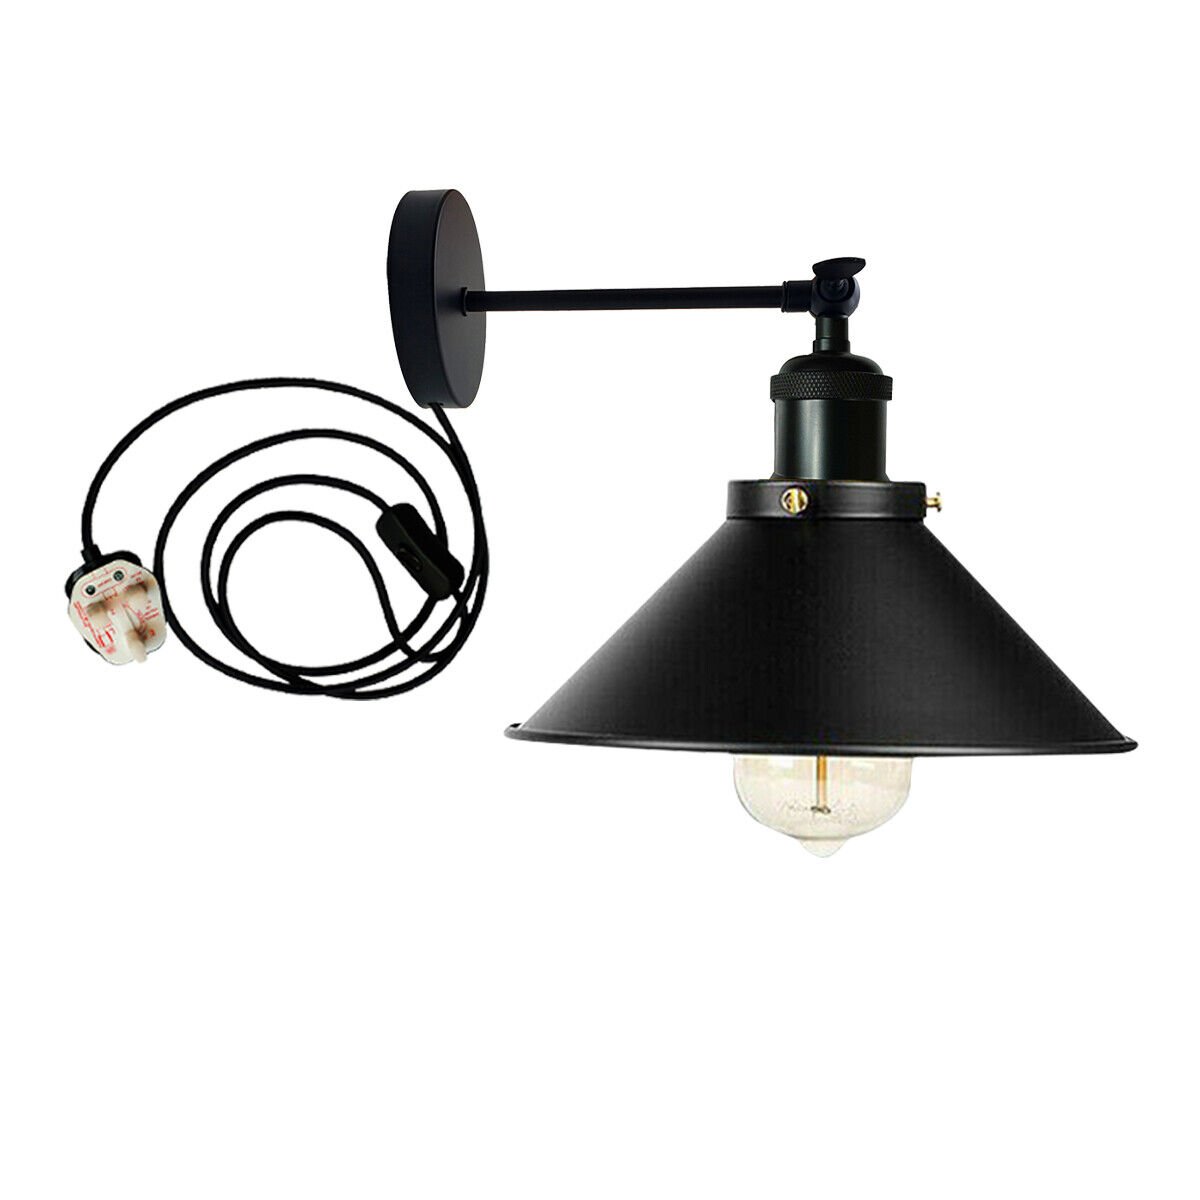 Vintage Cone Lamp Shades E27 Holder & Plug-In Light Dimmer Switch